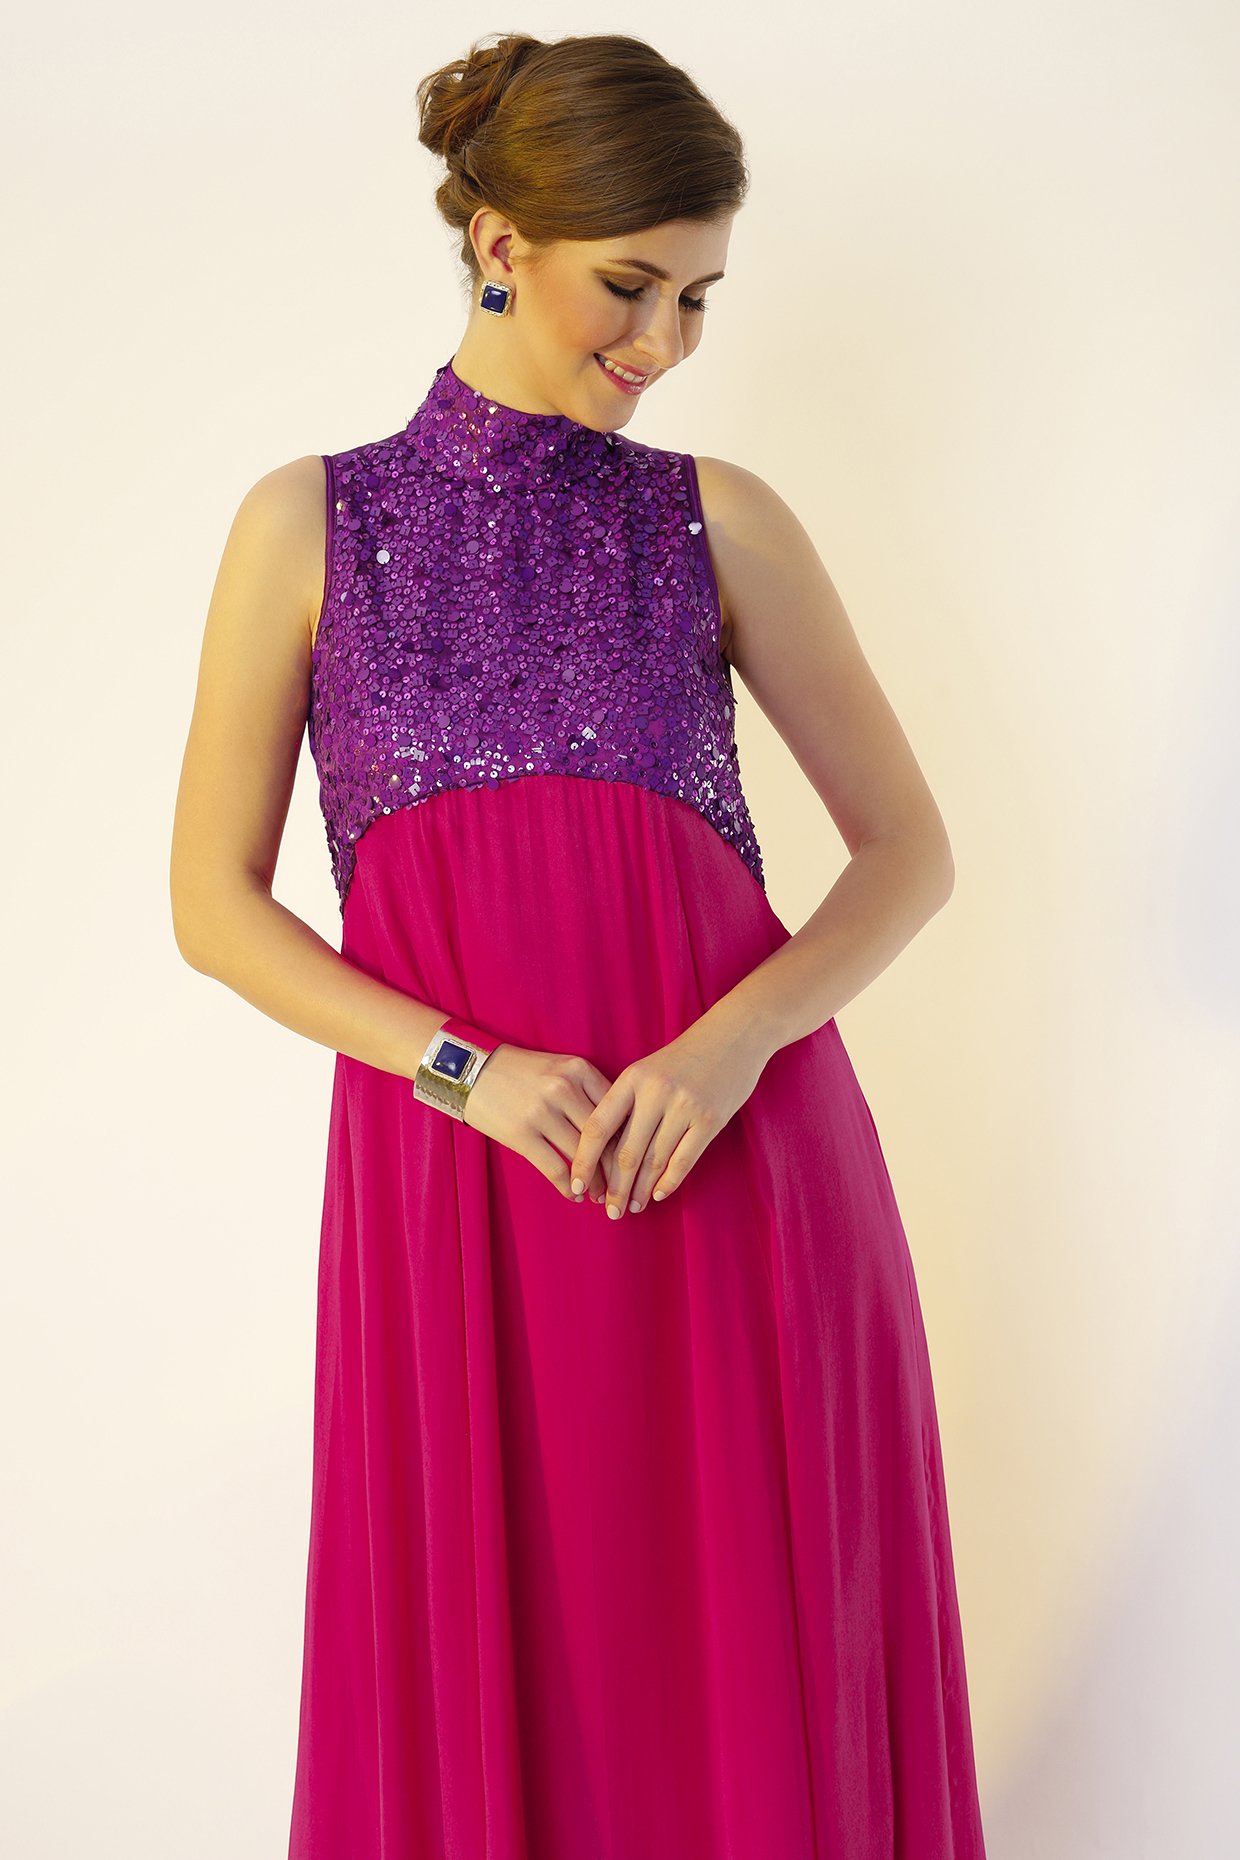 AG1802 - 40 / dark pink | Exquisite gowns, Dresses near me, Gowns dresses